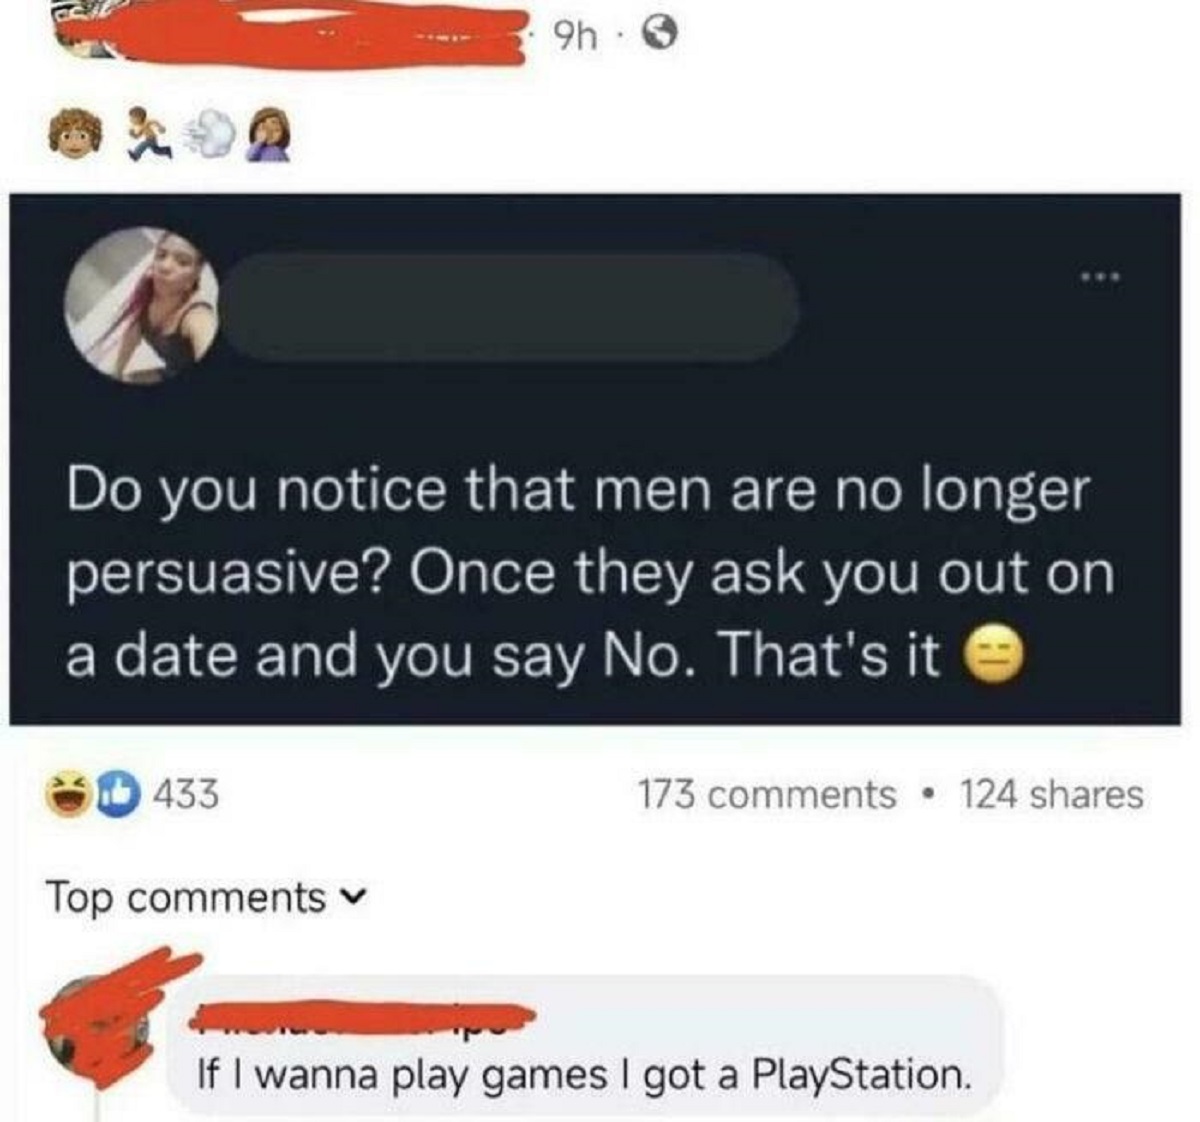 ispaces - Do you notice that men are no longer persuasive? Once they ask you out on a date and you say No. That's it 433 9h 3 Top 173 124 If I wanna play games I got a PlayStation.